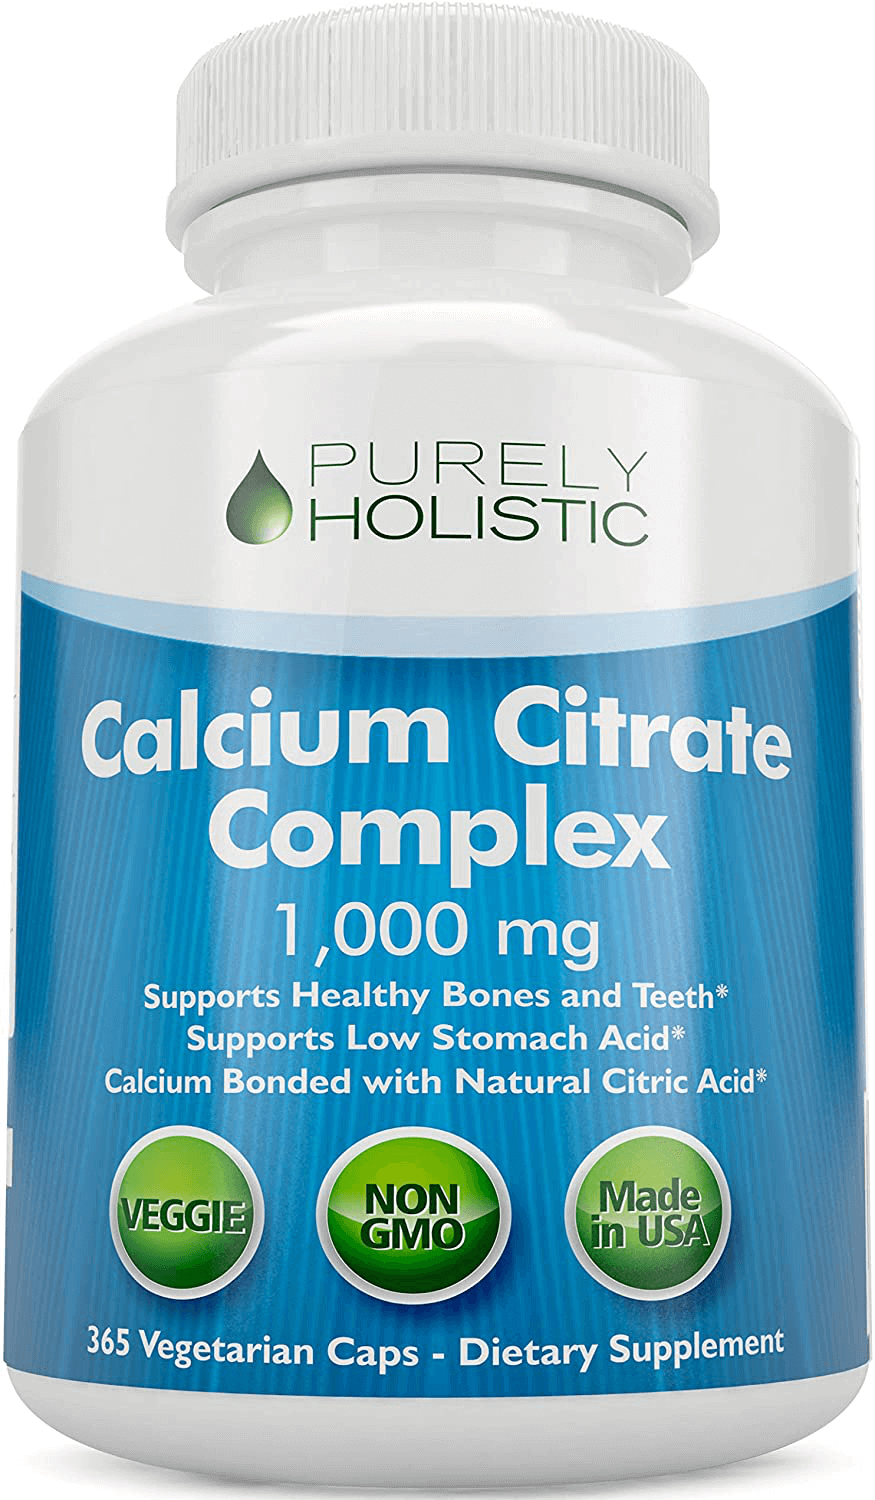 Calcium Citrate 1000mg - 365 Vegan Capsules not Tablets - Supports Health of Bones and Teeth - with Added Parsley, Dandelion and Watercress - Without Vitamin D - Made in The USA by Purely Holistic - vitamenstore.com